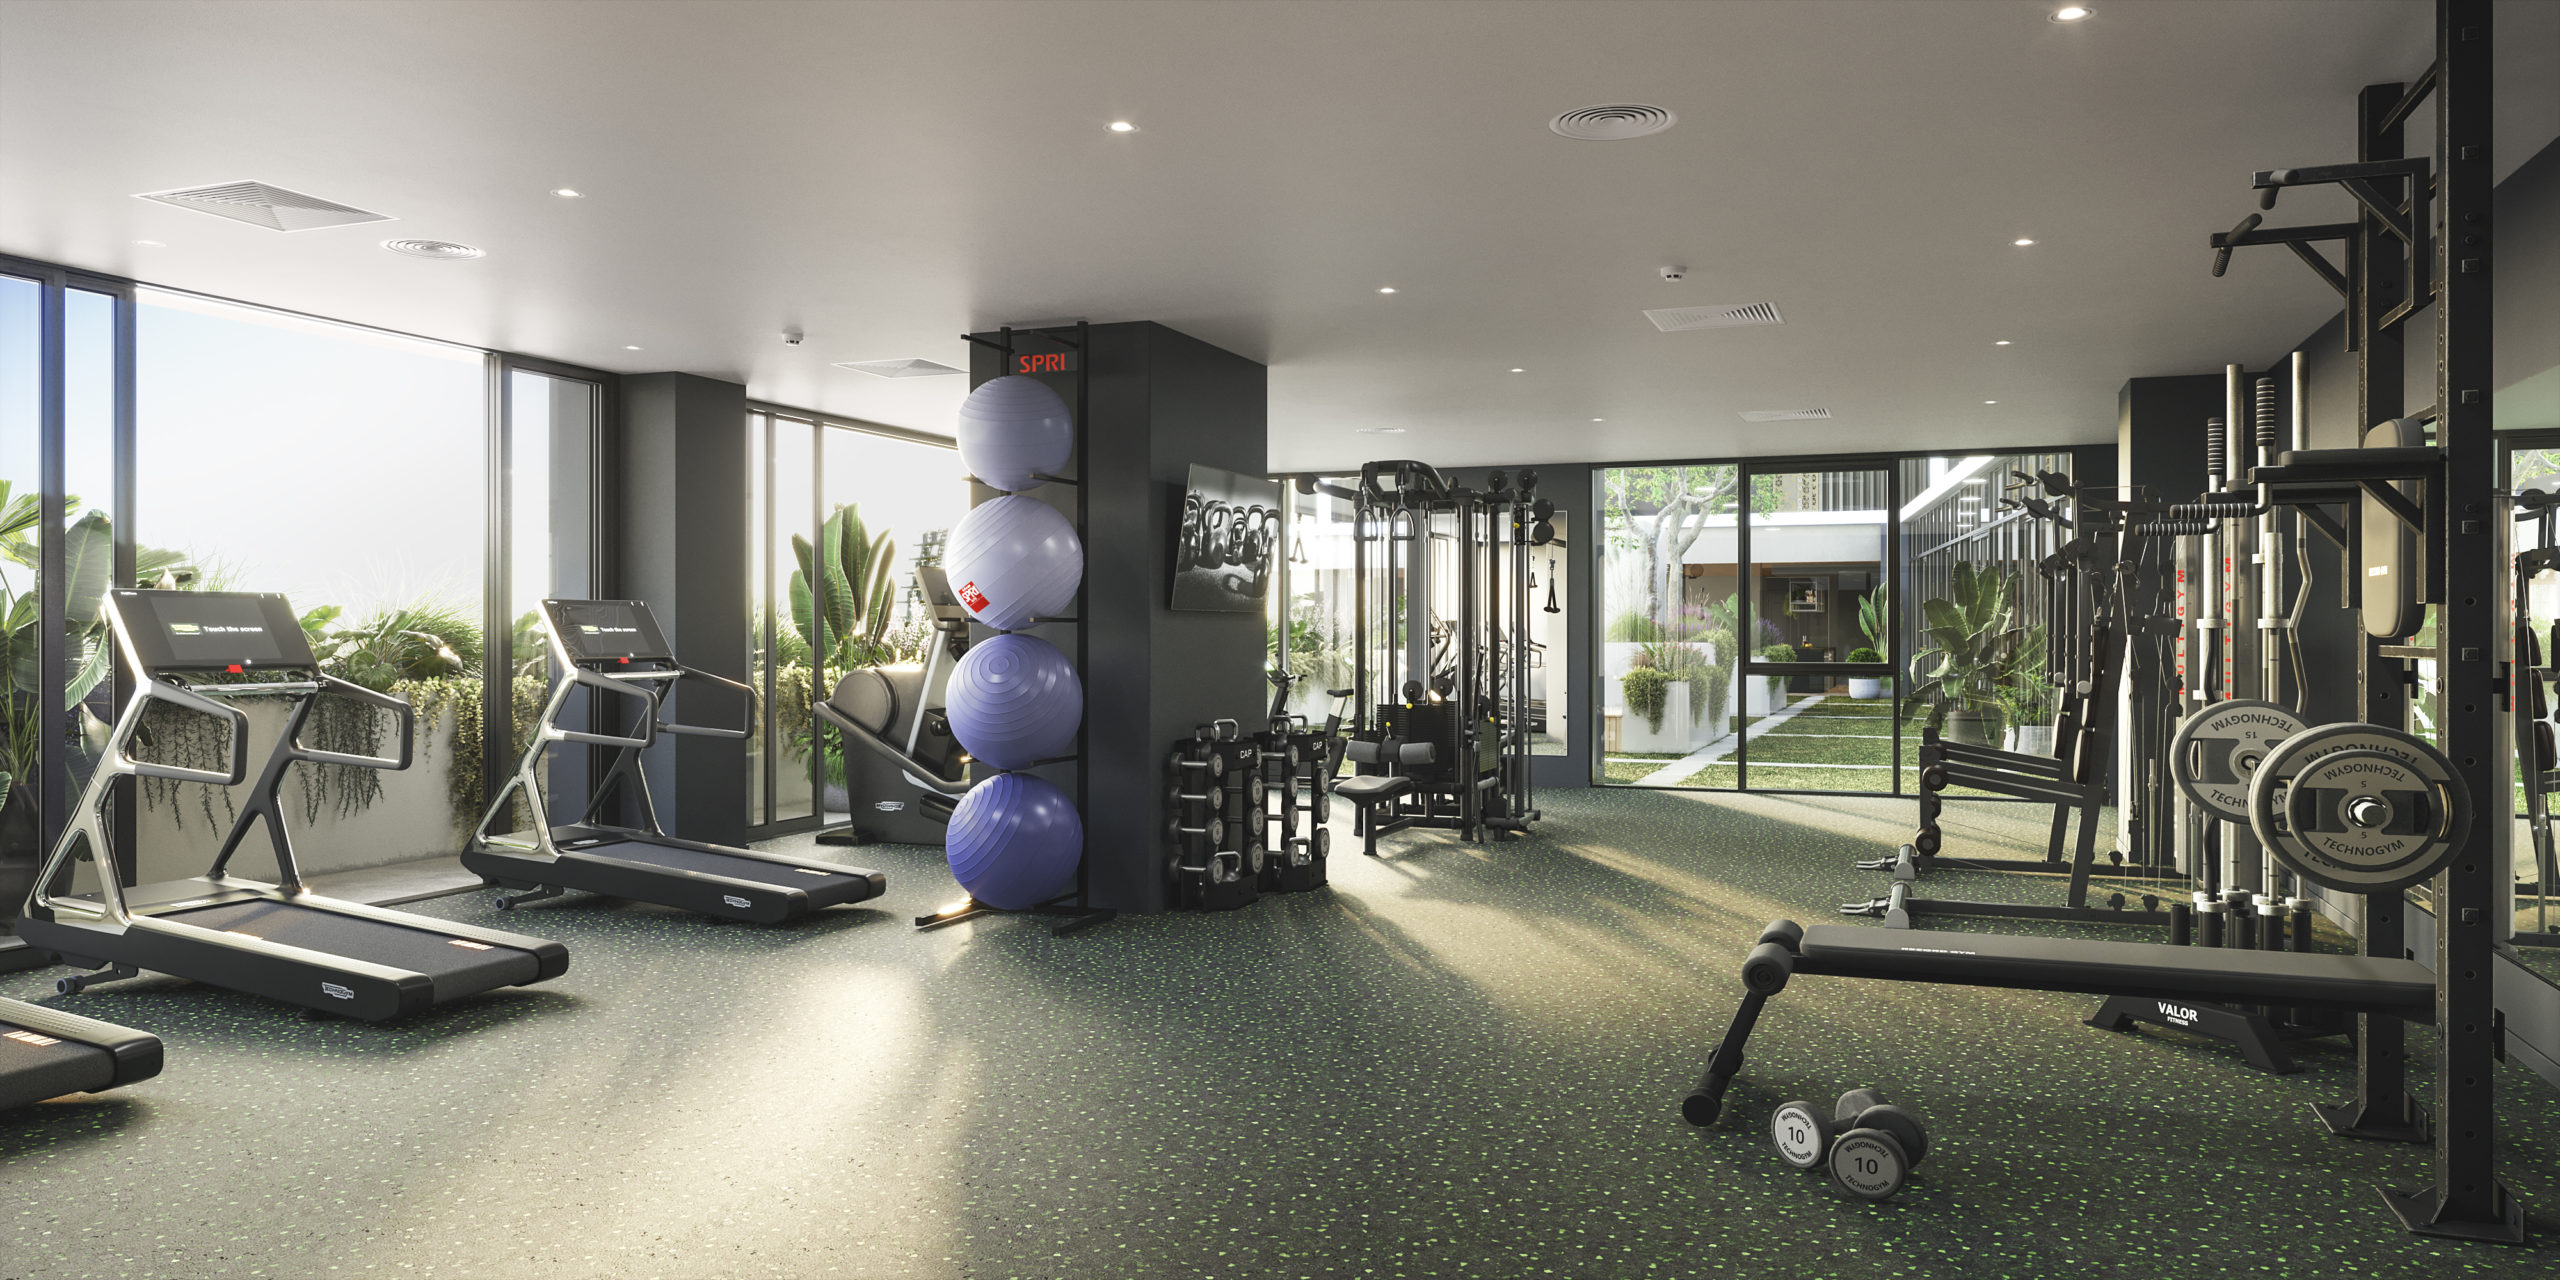 Resort-Style Amenities - Fully-Equipped Gym